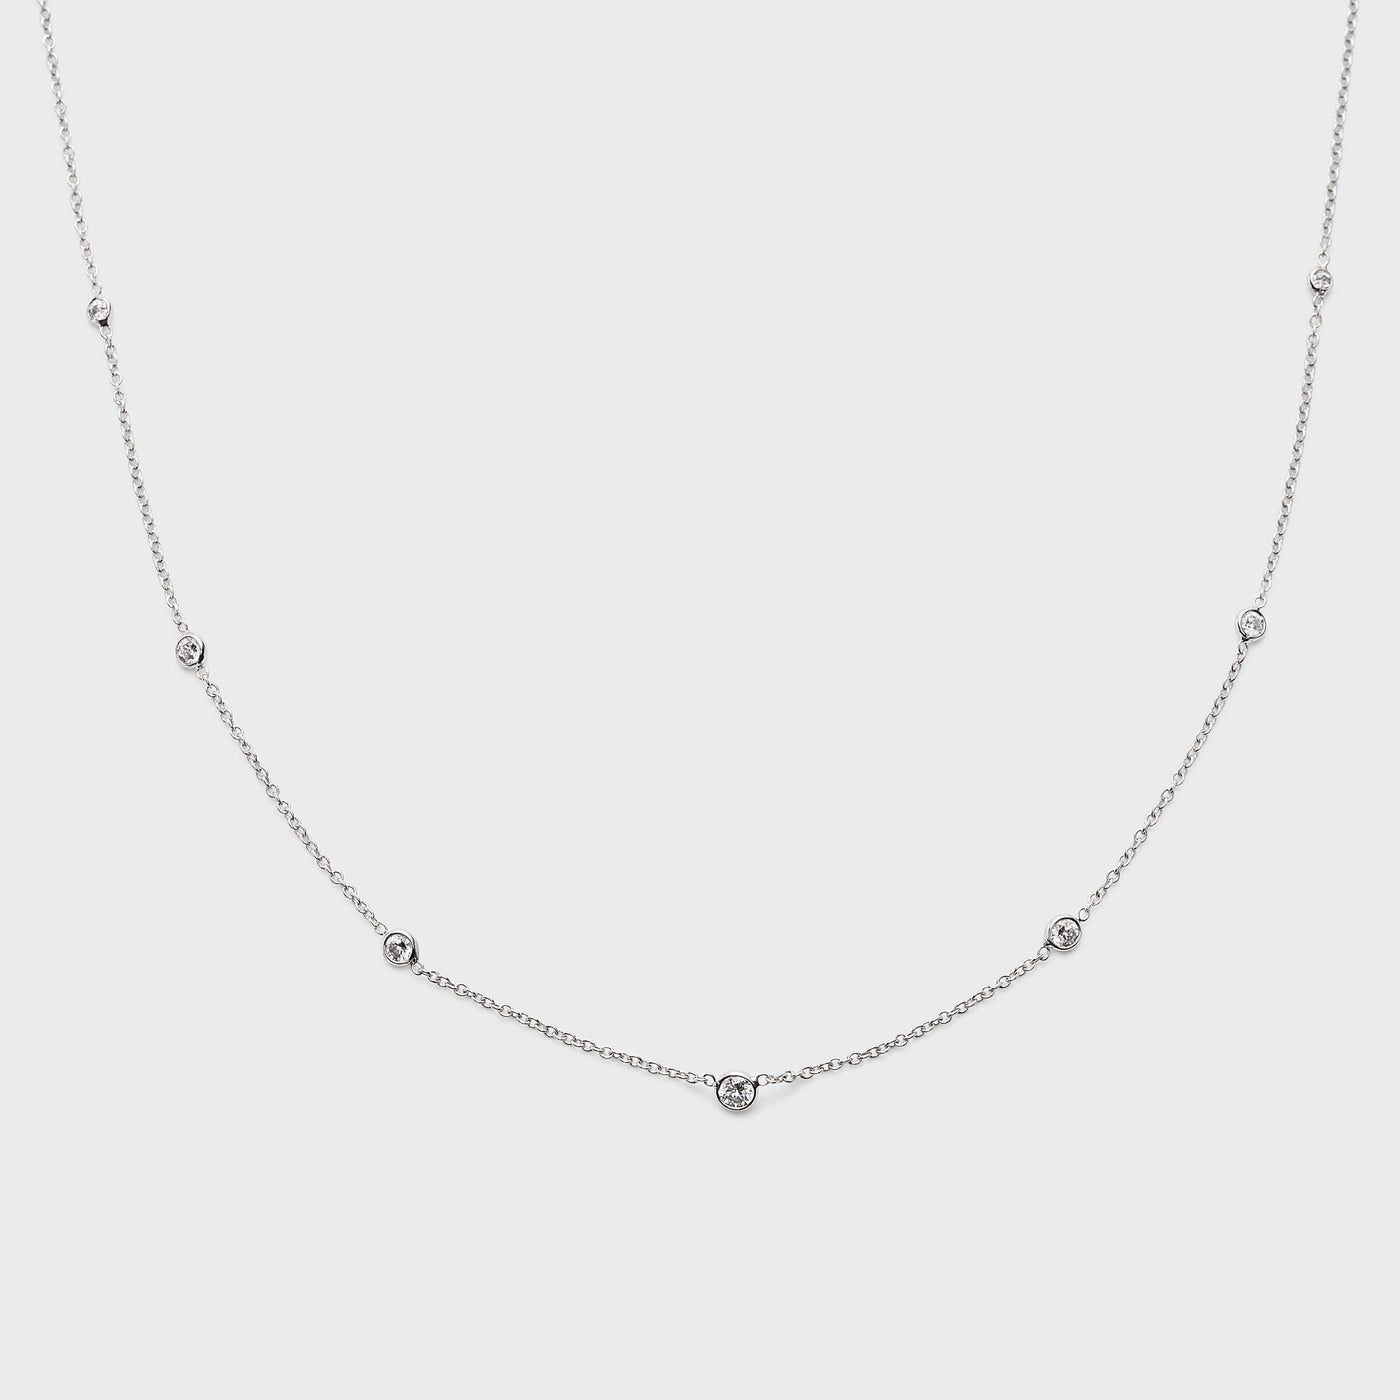 Diamond Station Necklace - The Clear Cut Collection